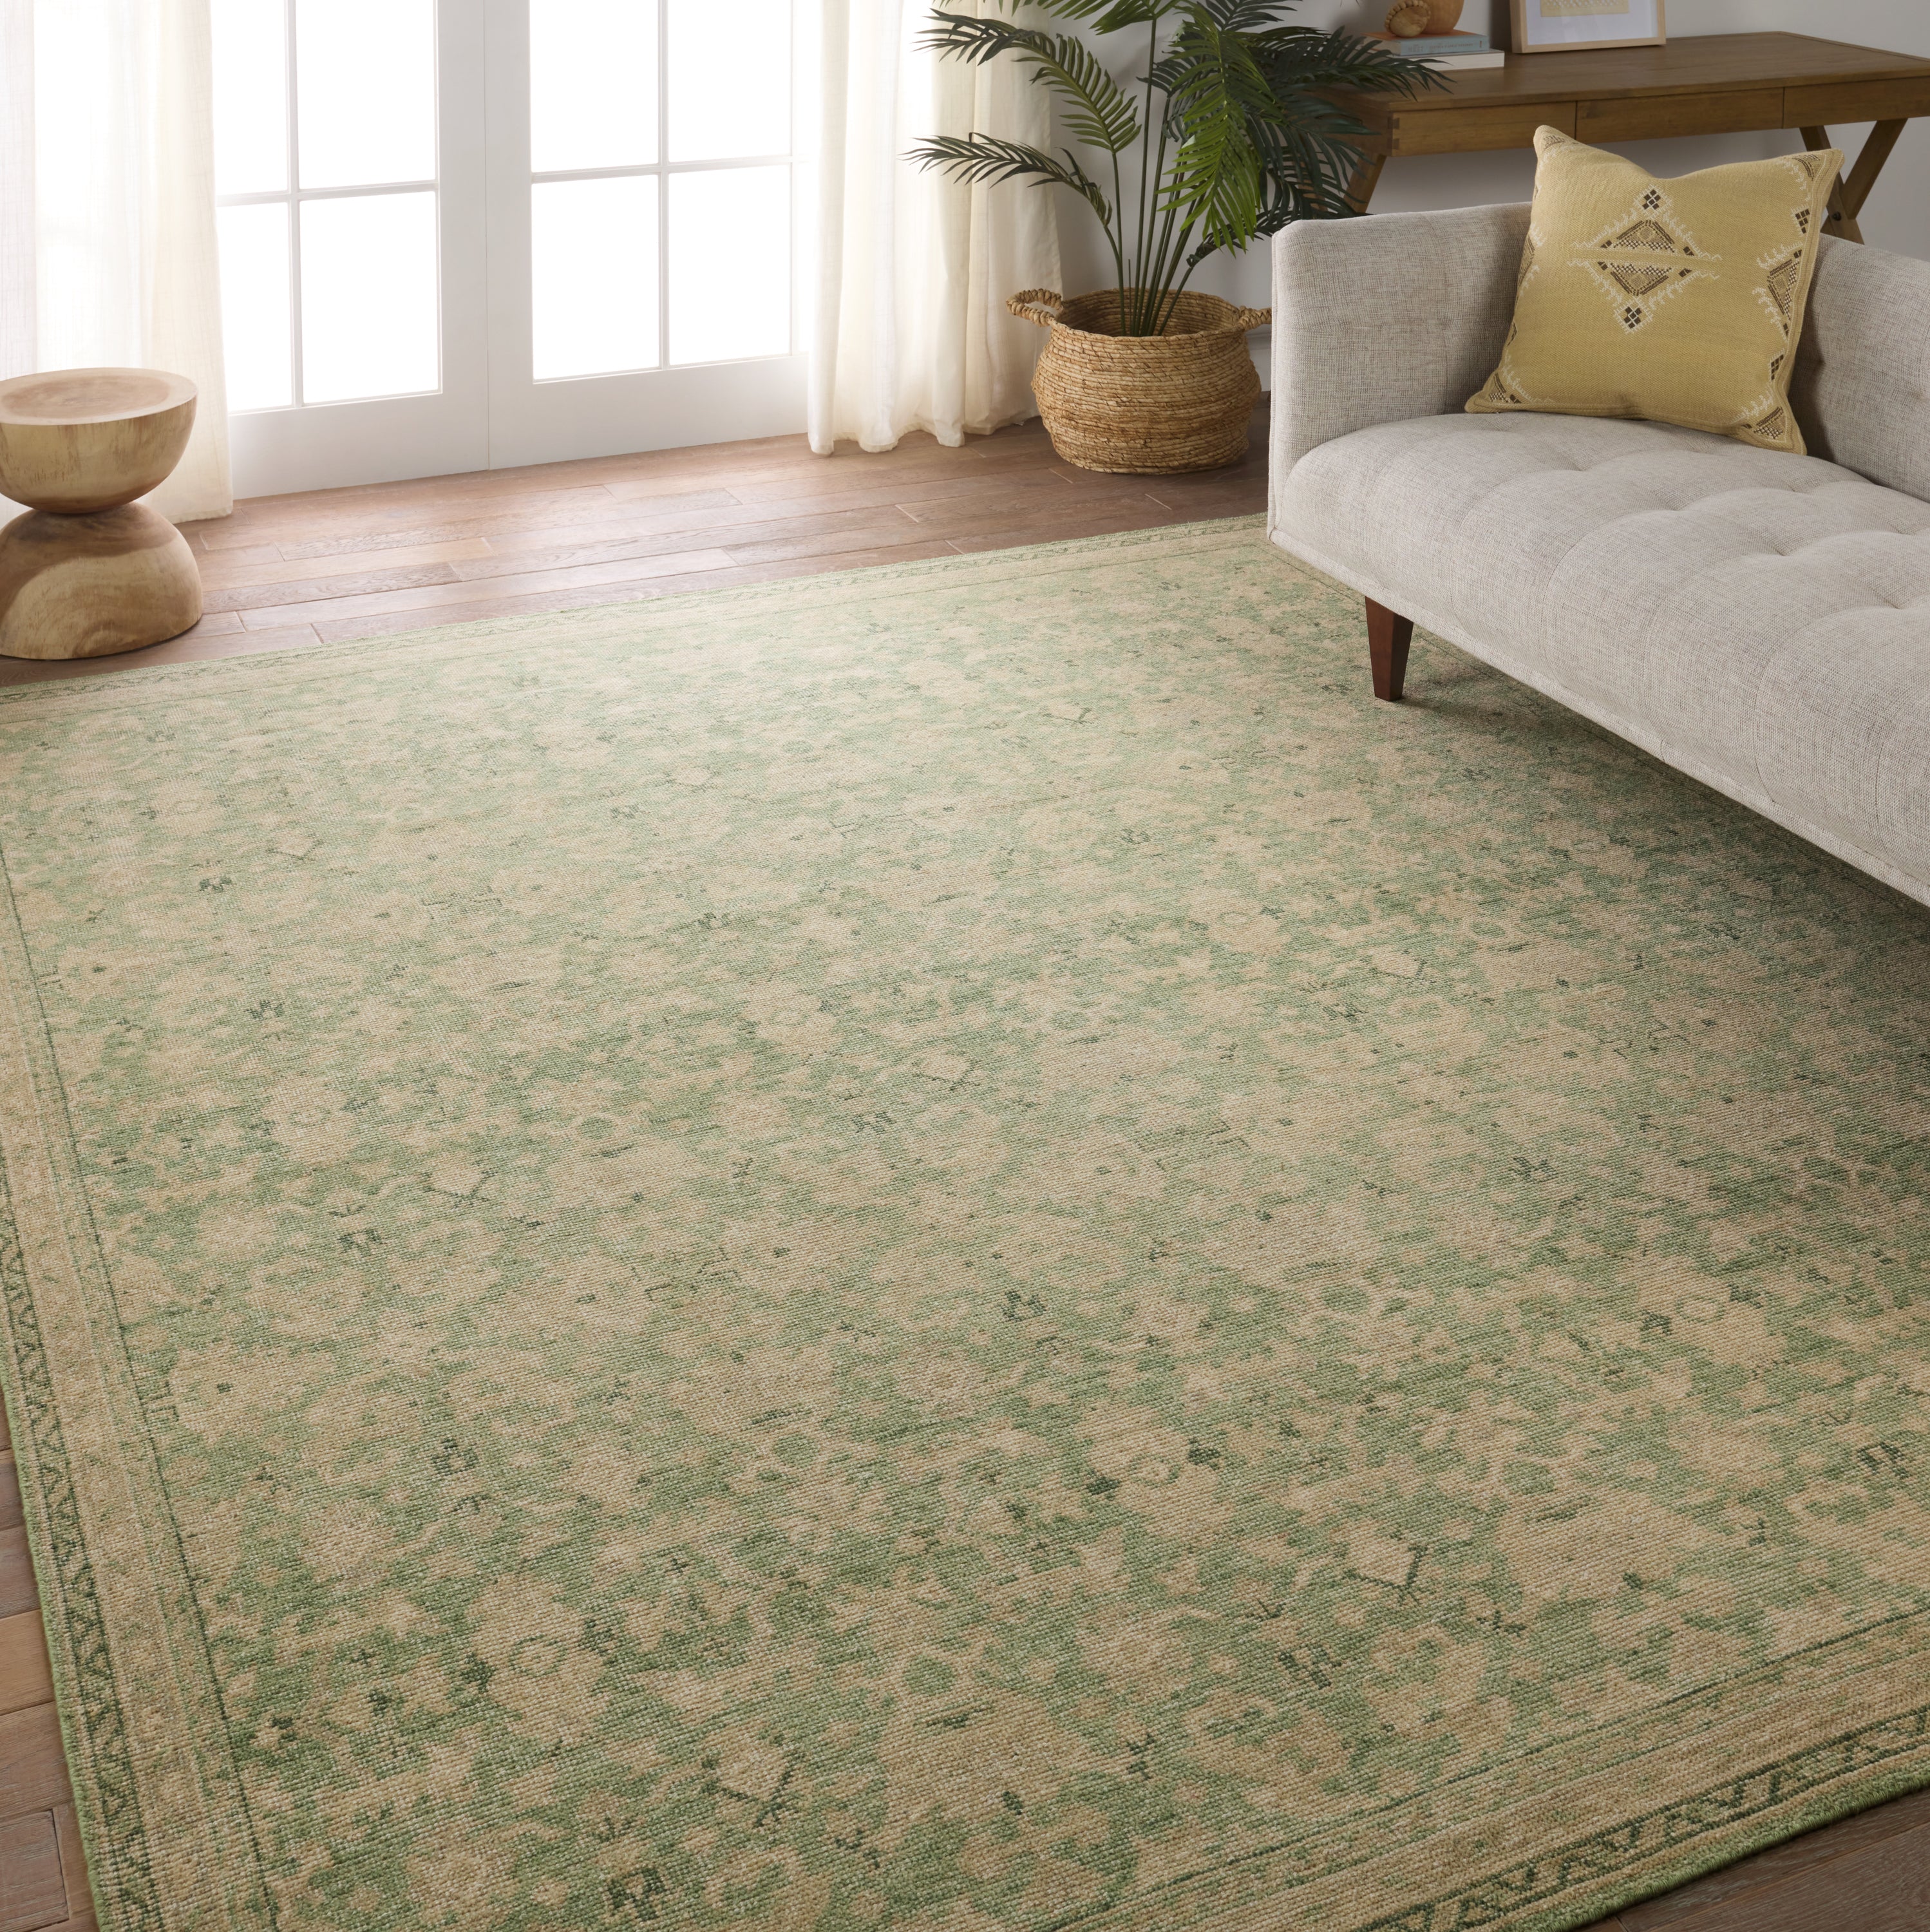 The Onessa collection marries traditional motifs with soft, subdued colorways for the perfect blend of fresh and time-honored style. These hand-knotted wool rugs feature a hand-sheared quality that lends the design a coveted vintage impression. The Rowland rug features a distressed, floral trellis pattern in hues of green, tan, and cream. Amethyst Home provides interior design, new construction, custom furniture, and area rugs in the Newport Beach metro area.